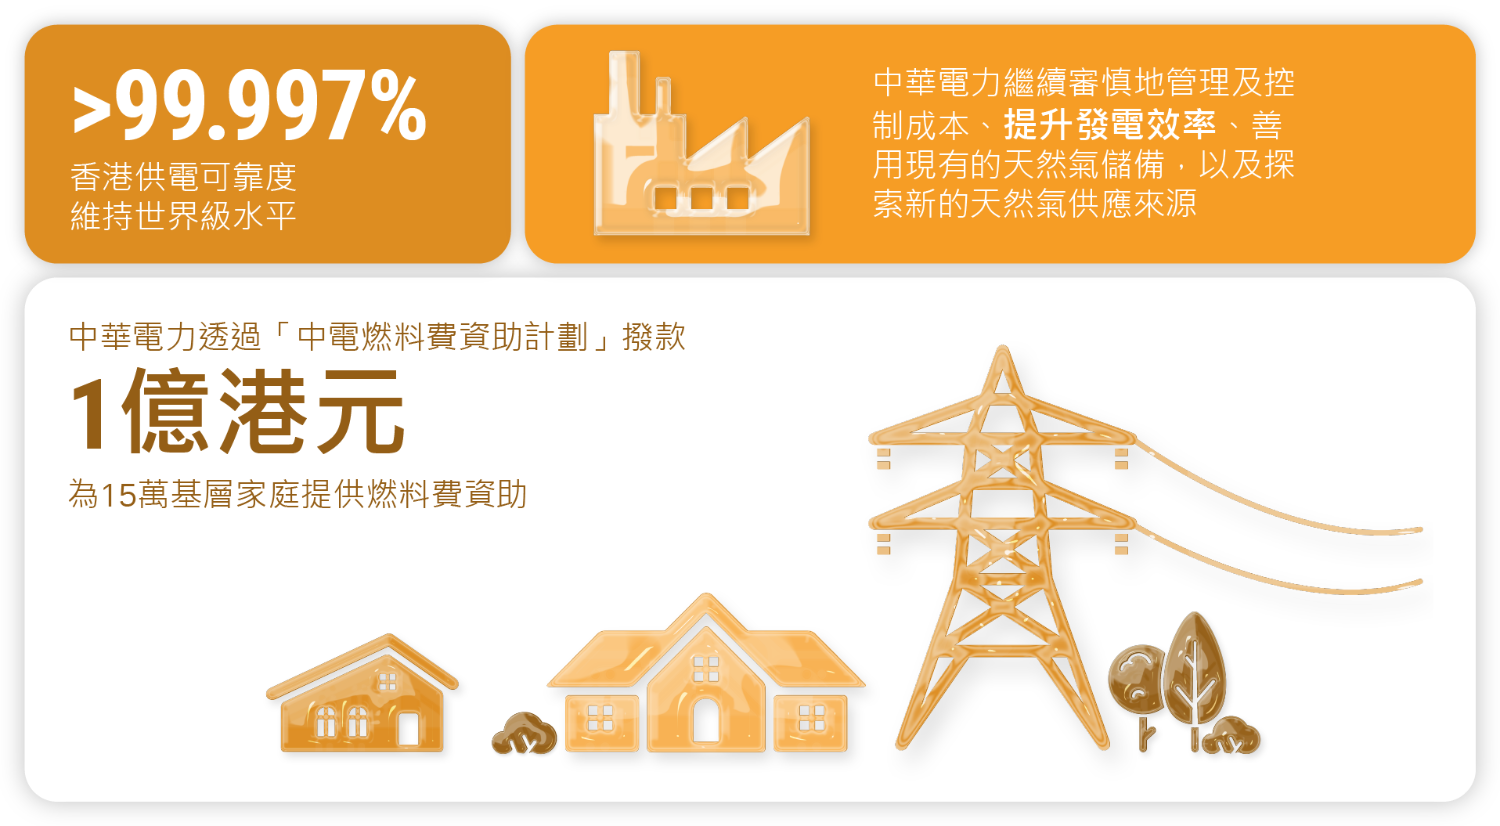 CLP_Material_Topic_infographic_Chinese_PART2_Reliable and reasonably priced energy